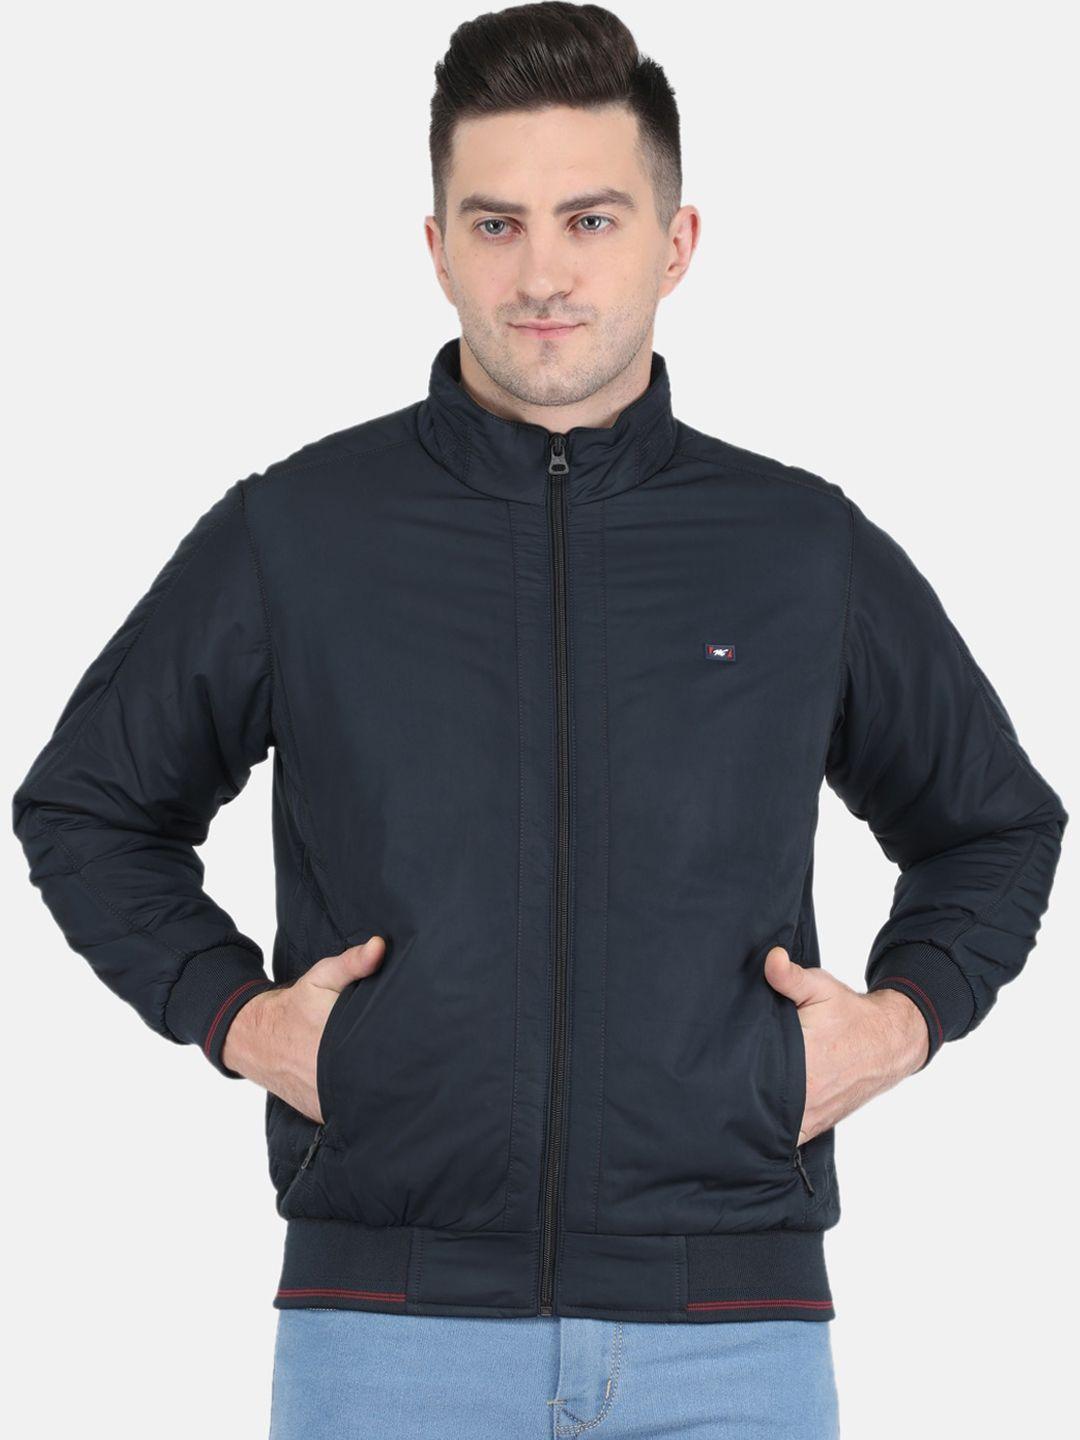 monte-carlo-men-navy-blue-solid-polyester-bomber-jacket